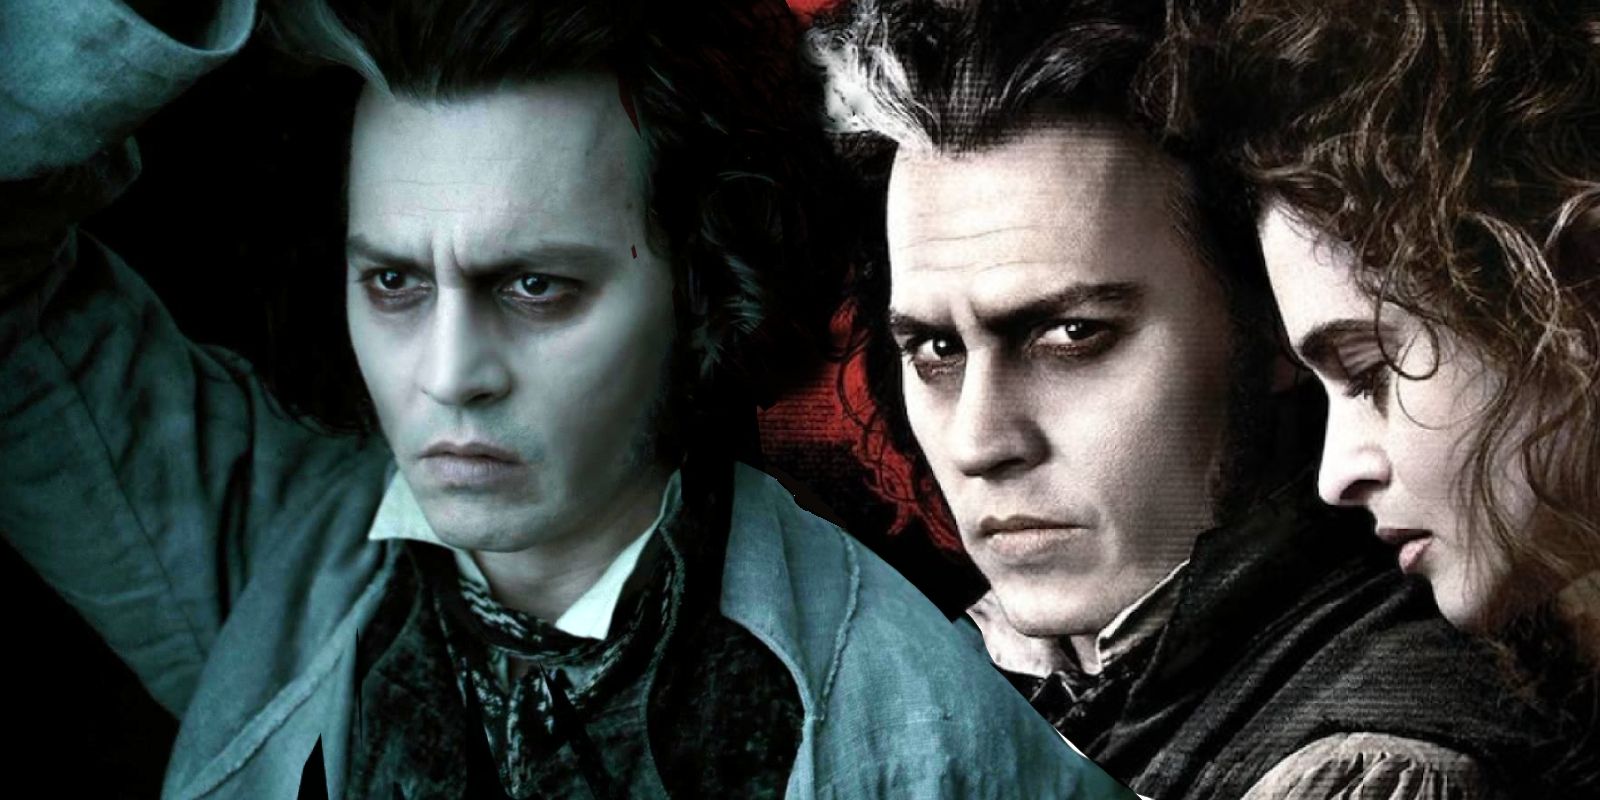 Is Sweeney Todd Based on a True Story?